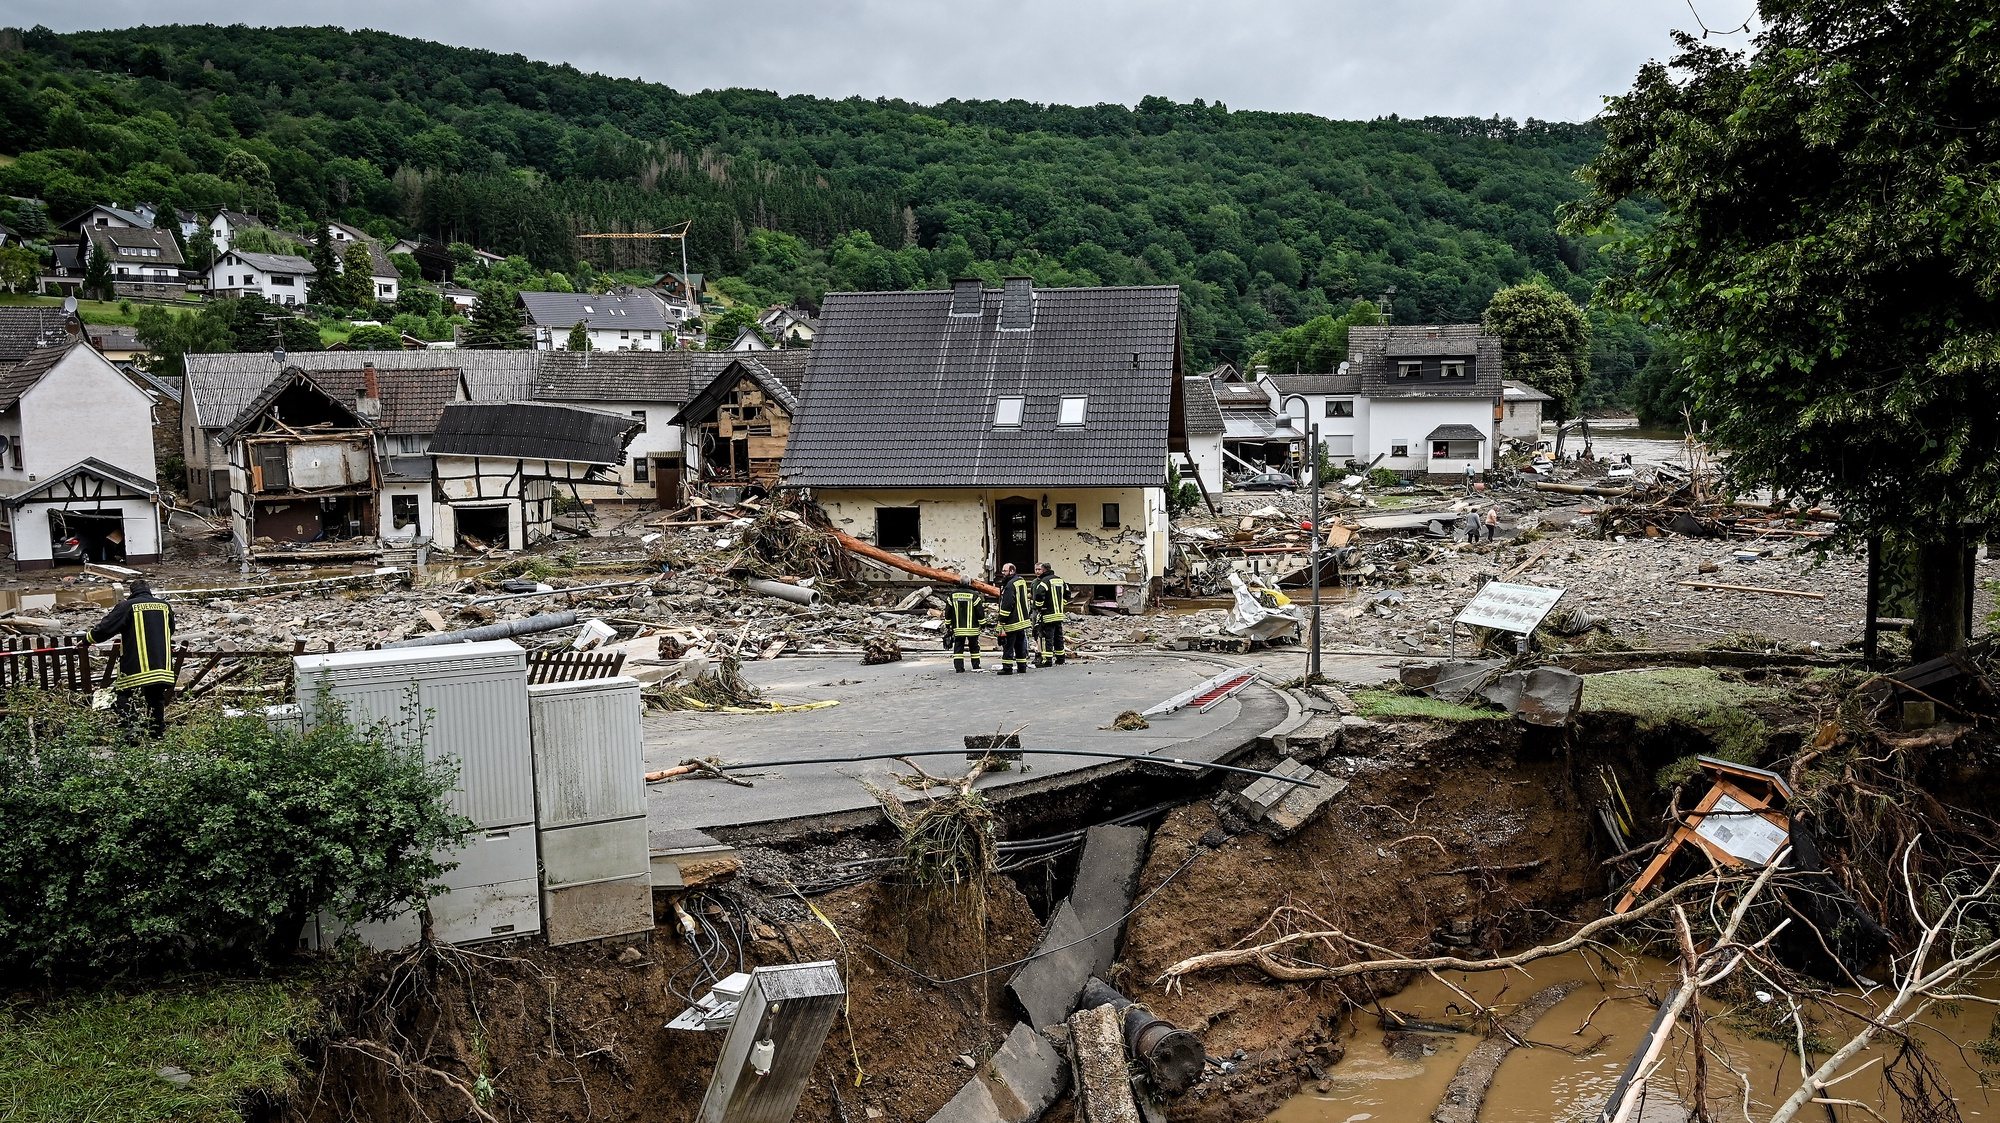 epa09346717 A view of the damage at village of Schuld in the district of Ahrweiler after heavy flooding of the river Ahr, in Schuld, Germany, 15 July 2021. Large parts of Western Germany were hit by heavy, continuous rain in the night to 14 July, resulting in local flash floods that destroyed buildings and swept away cars.  EPA/SASCHA STEINBACH